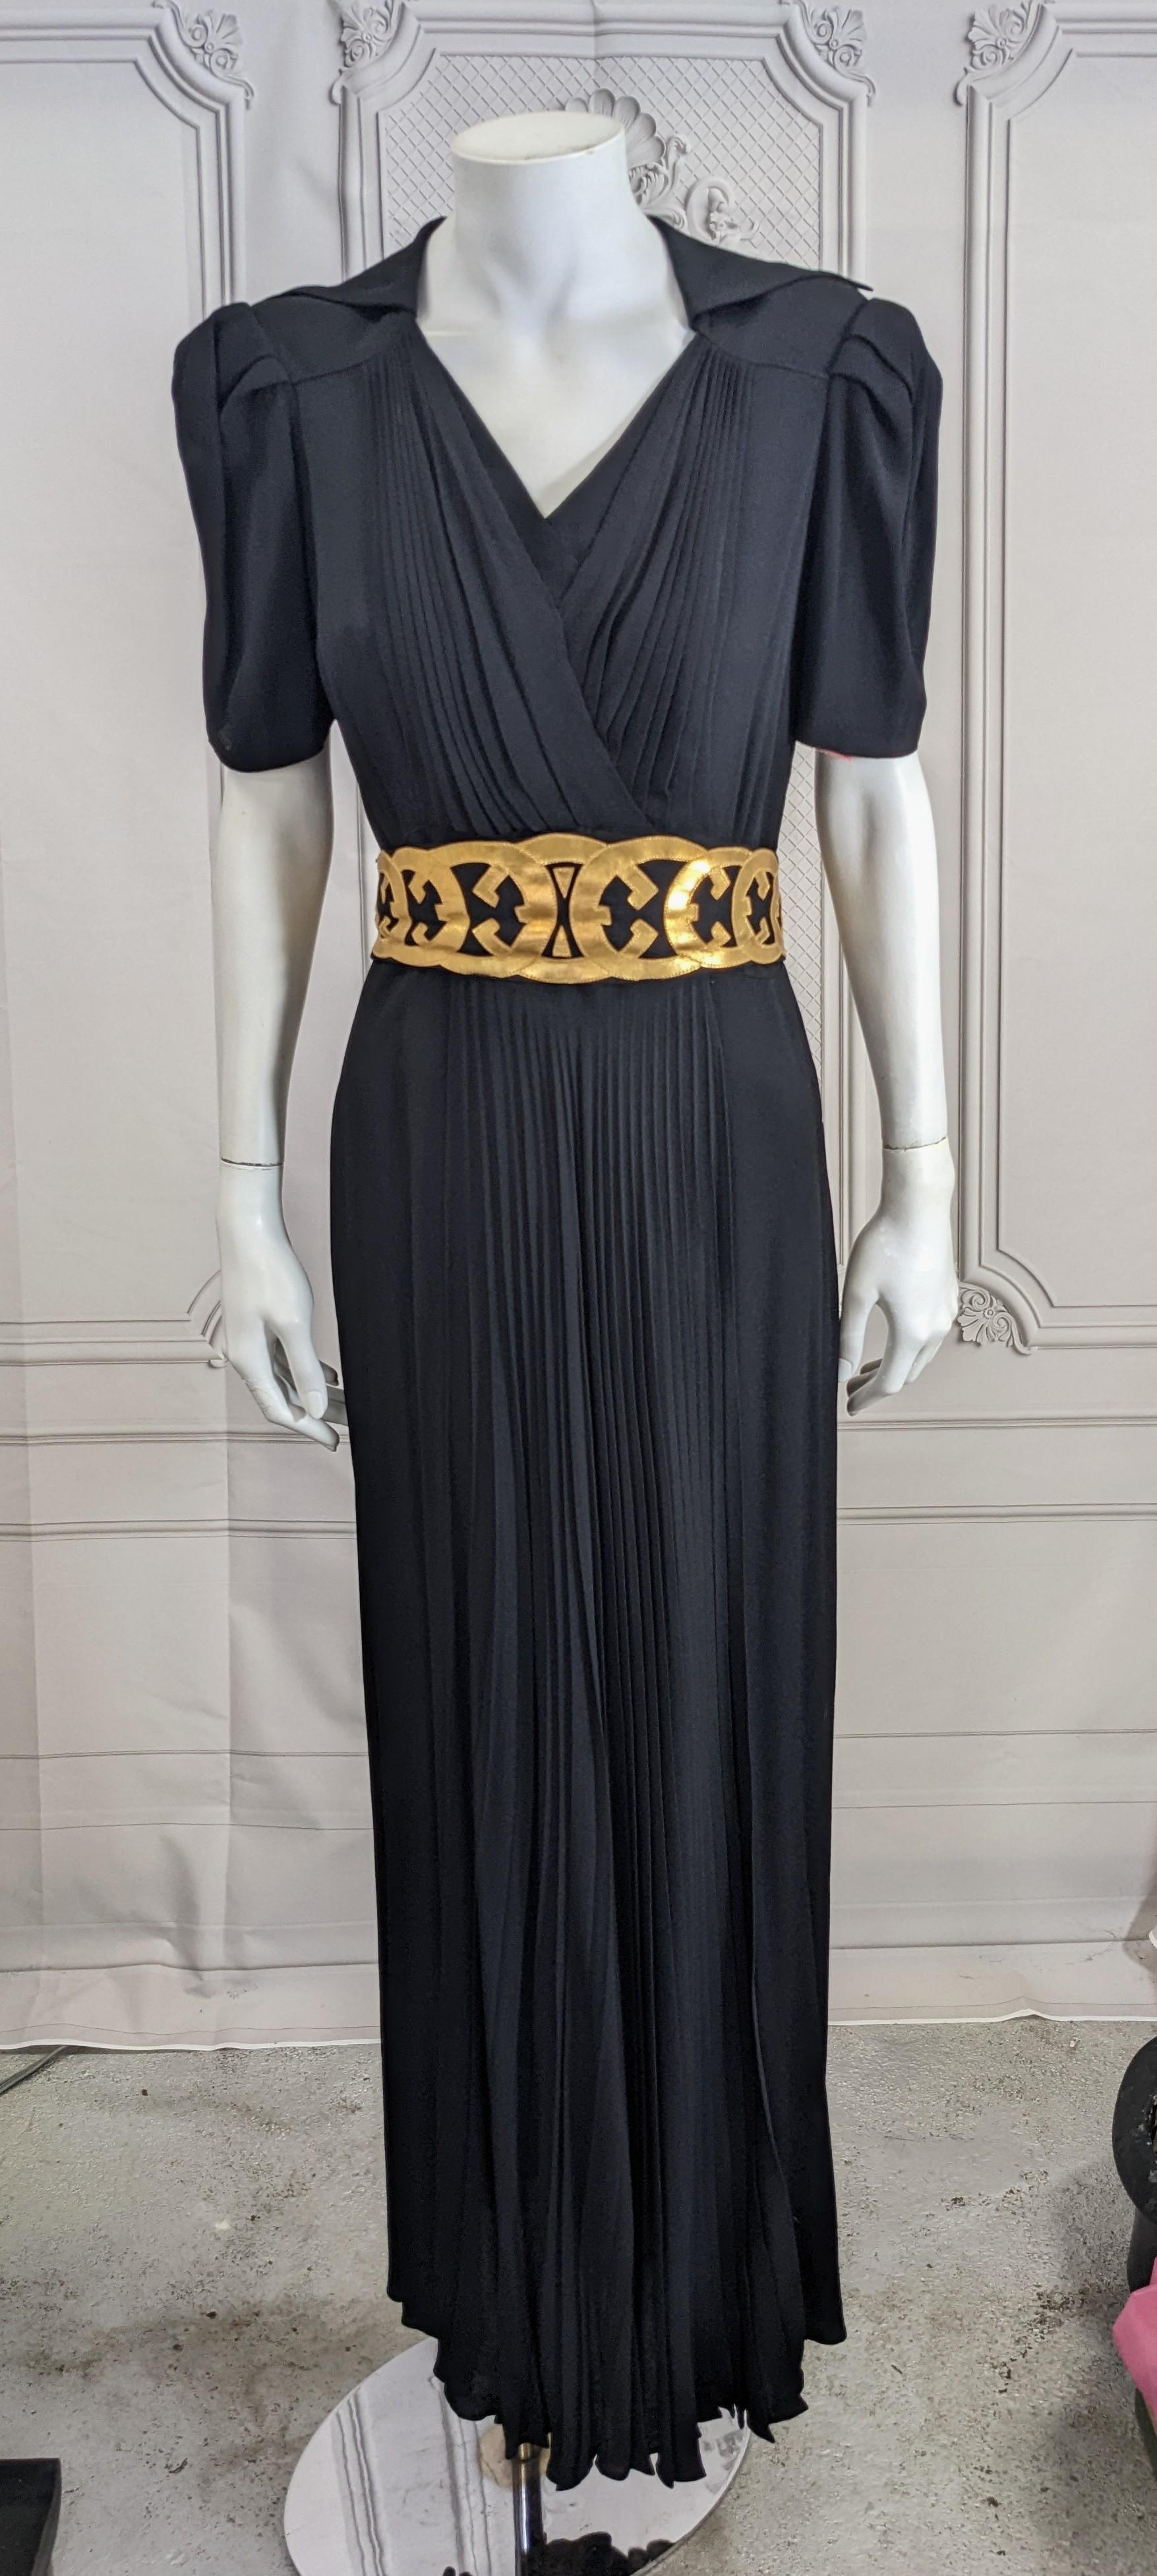 Black Rayon Crepe and Gold Kid Leather One Piece Deco Gown from the late 1930's, early 1940's. Pleated faux wrap design with large exaggerated collar and amazing gold kid applique Deco design belt. Large tucked shoulders with a pleated panel running